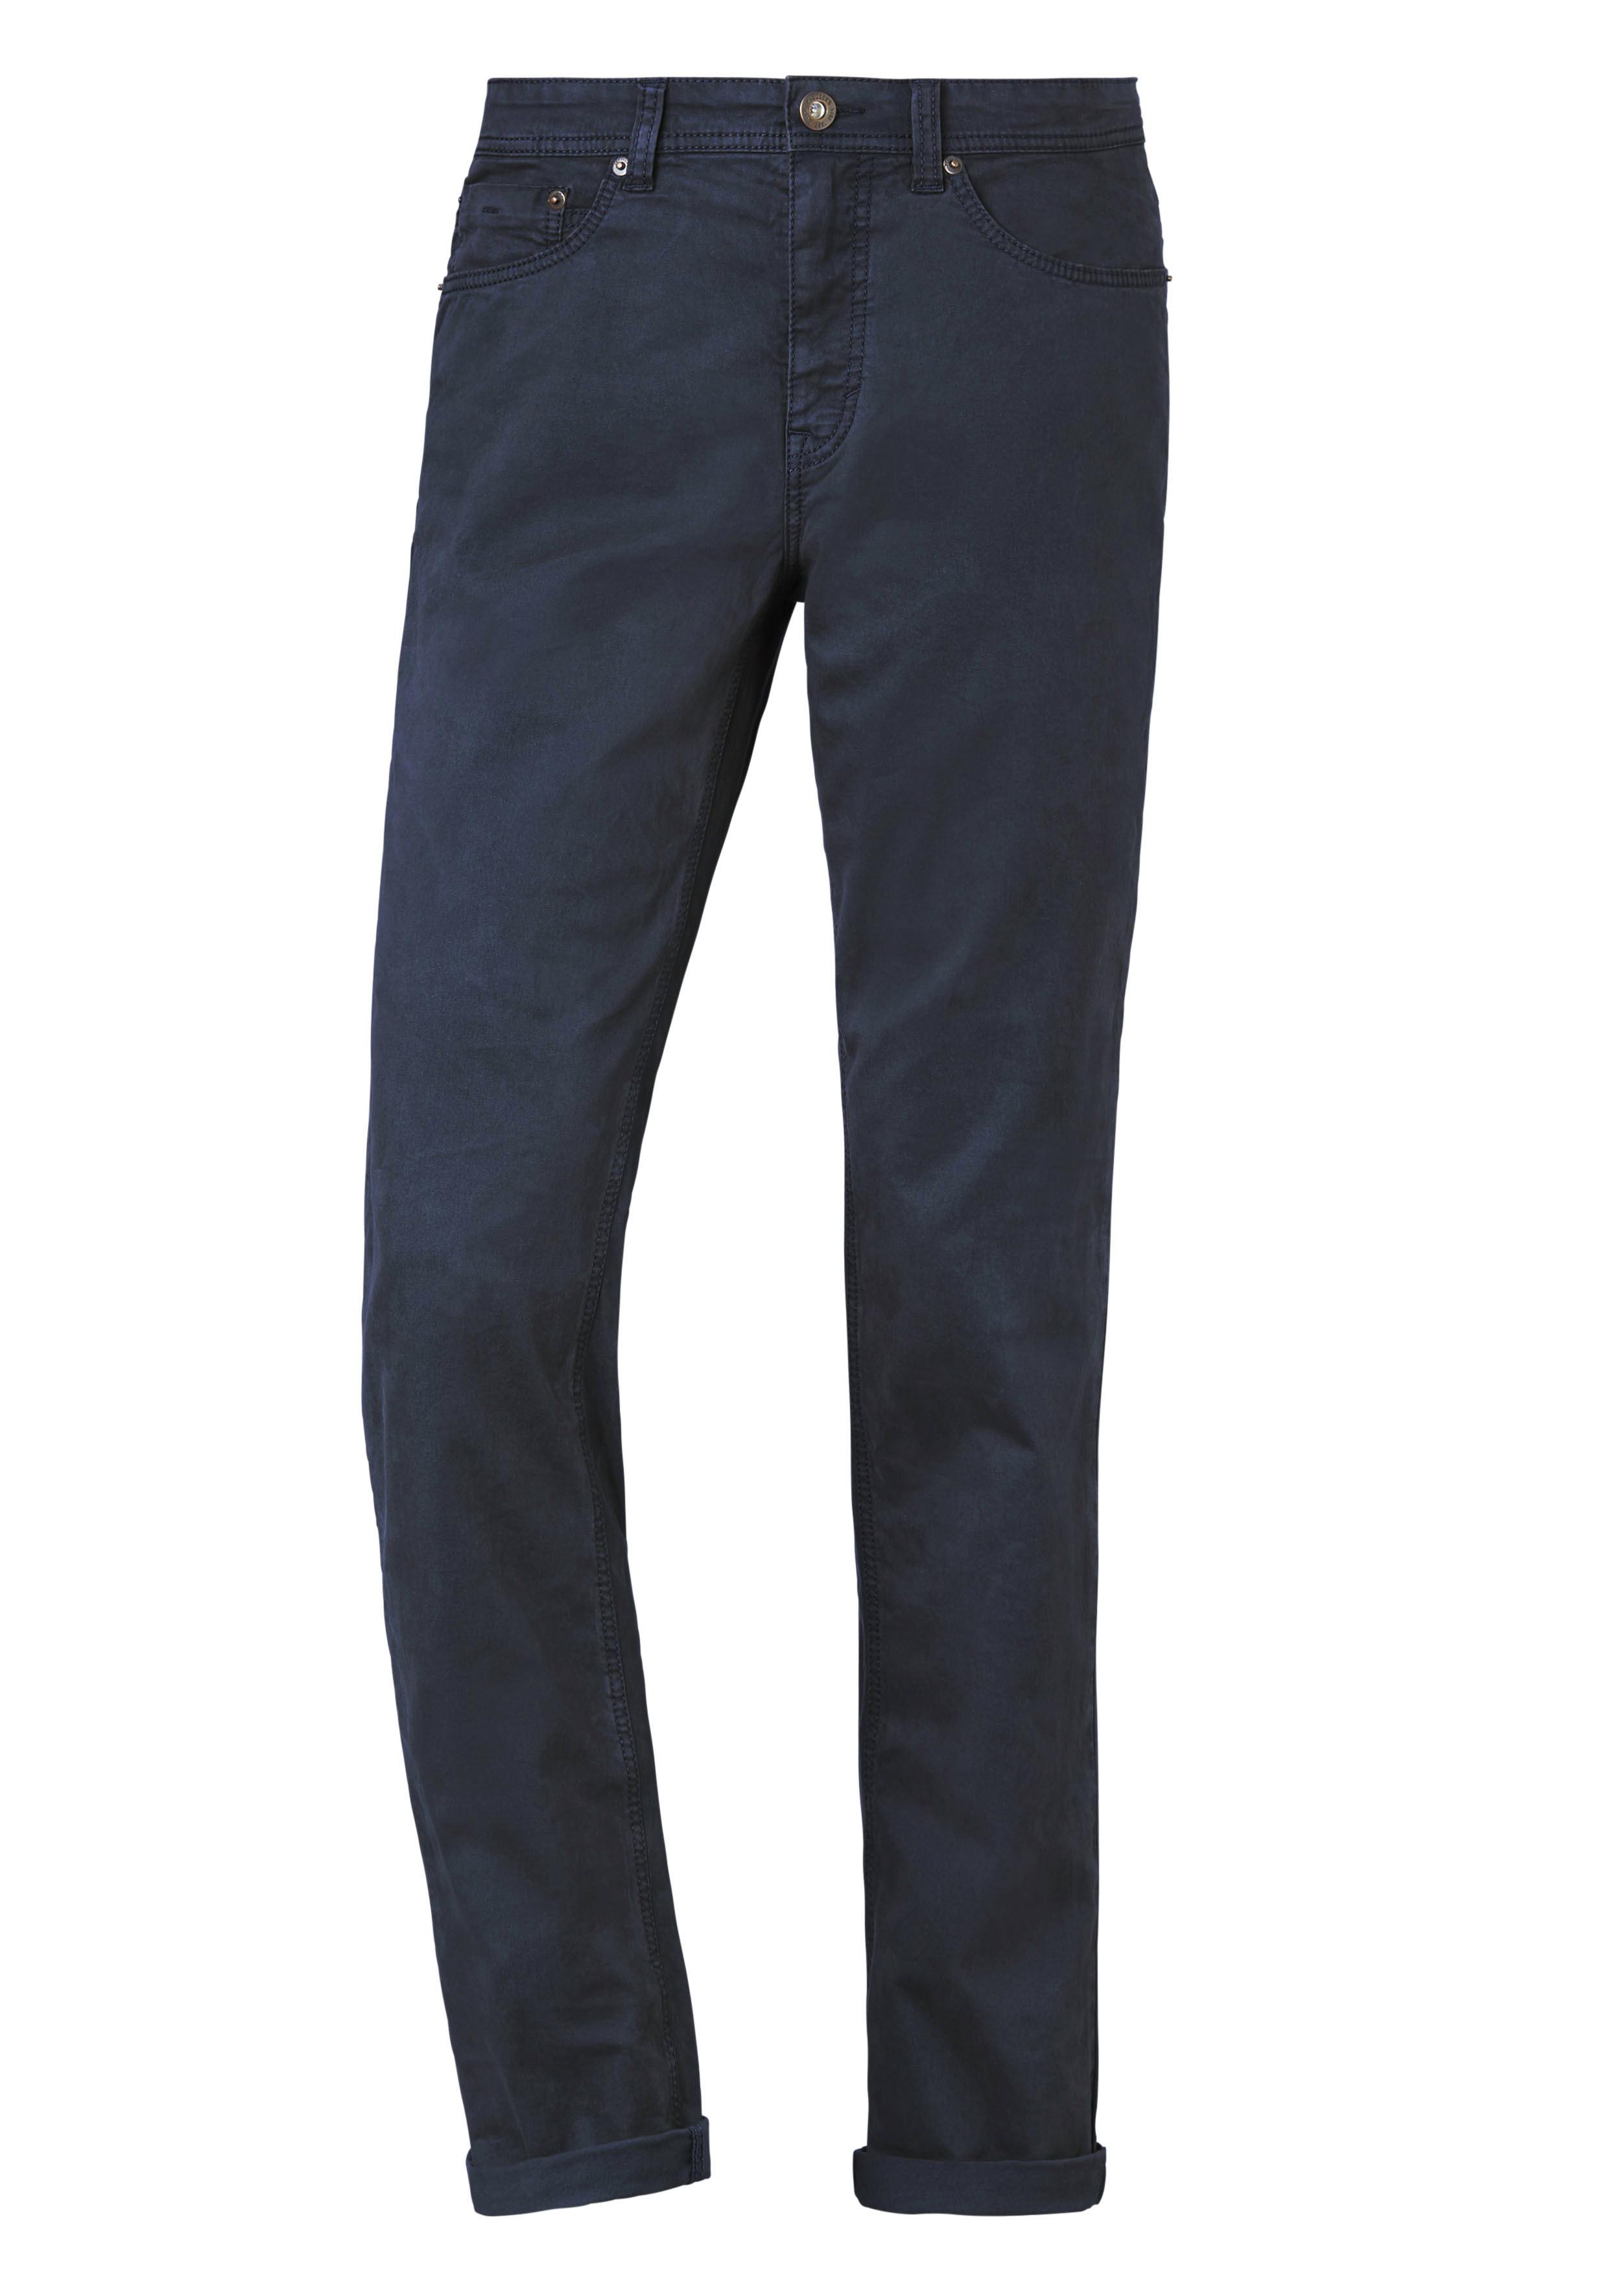 Image of Paddock&#039s Jeans Ranger Colored navy